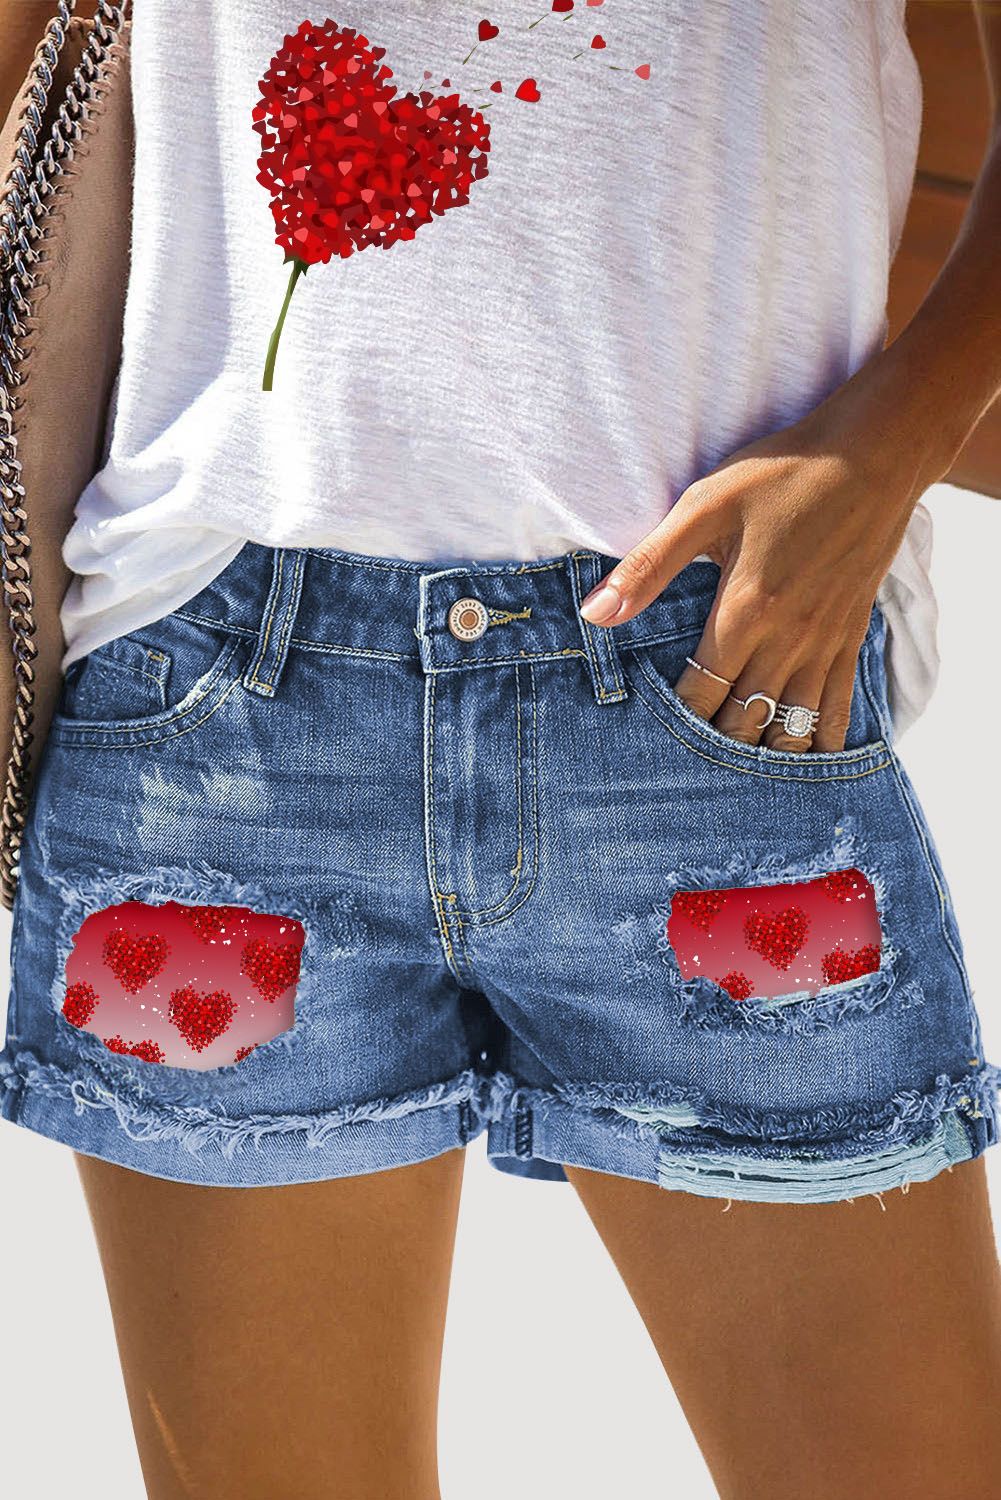 Red Heart-shape Graphic Ripped Casual Denim Shorts $ 19.99 - Evaless